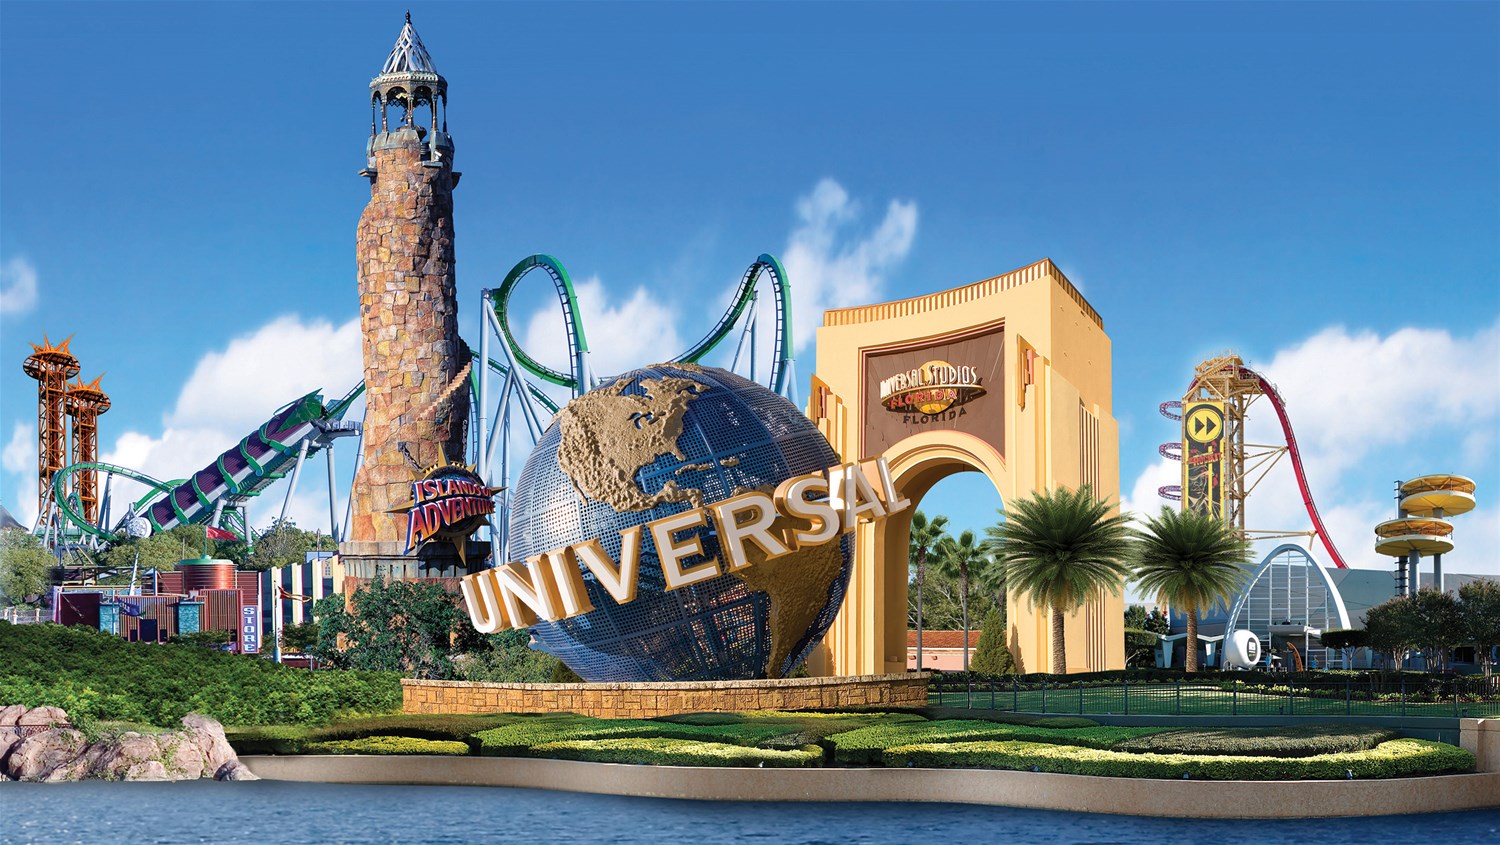 Everything You Need to Know About Visiting Universal Orlando Resort